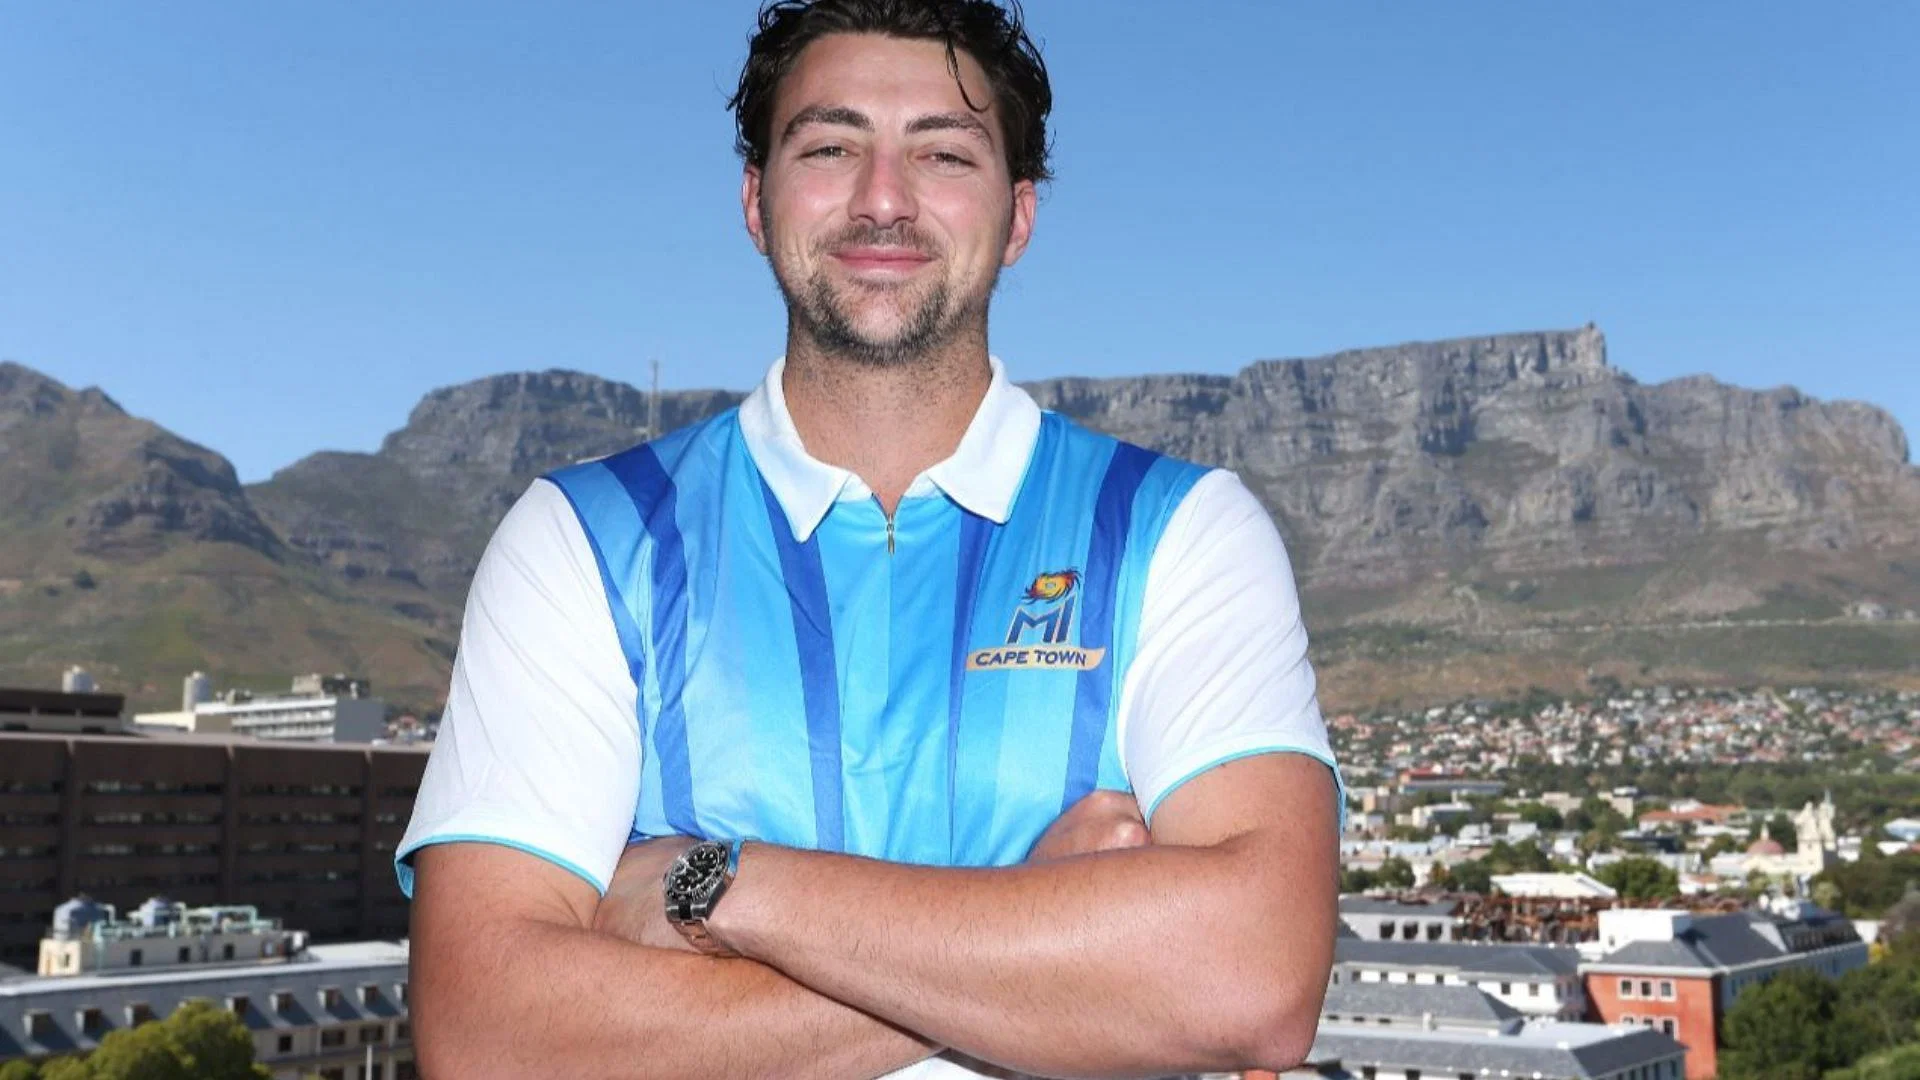 MI Cape Town Sign Tim David And Henry Brookes For The Remainder Of The SA20 Season